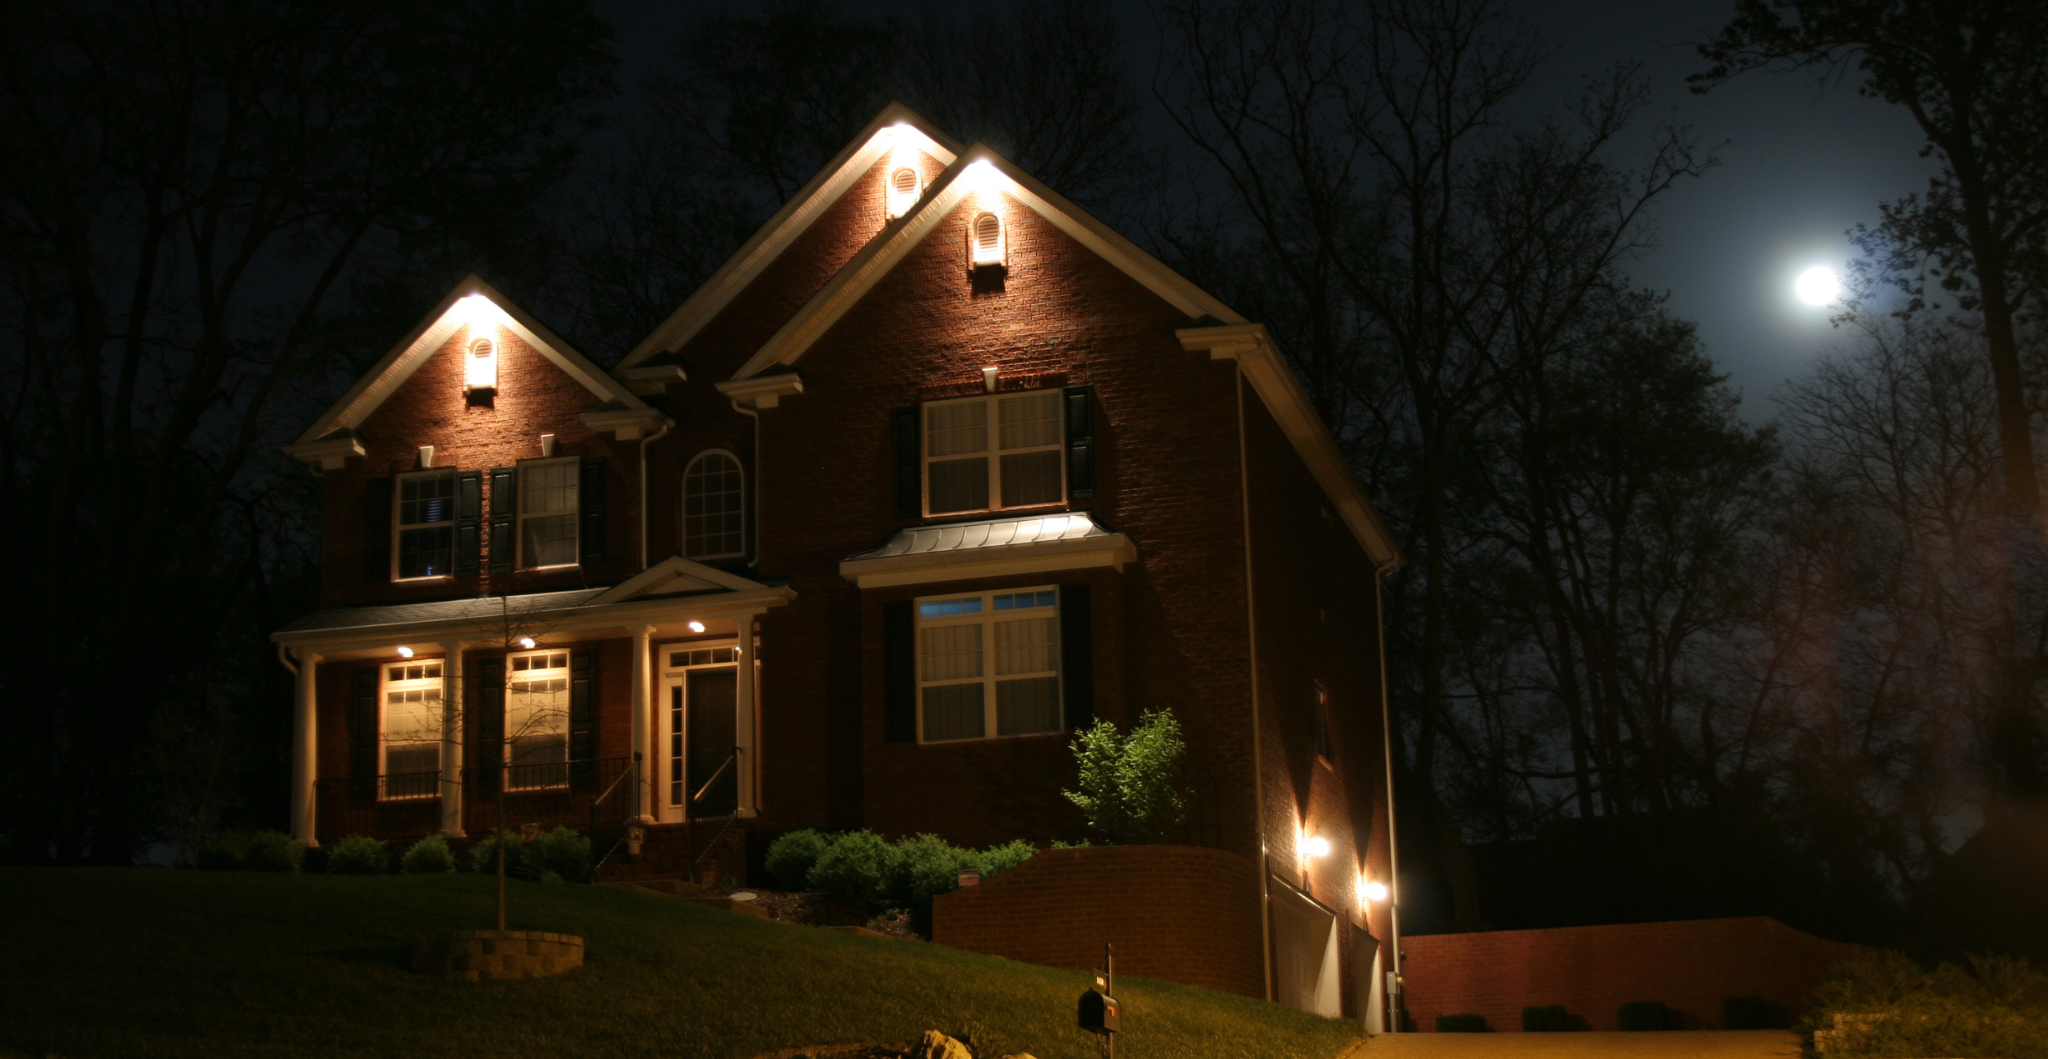 lights on in the house at night helps prevent home break-in